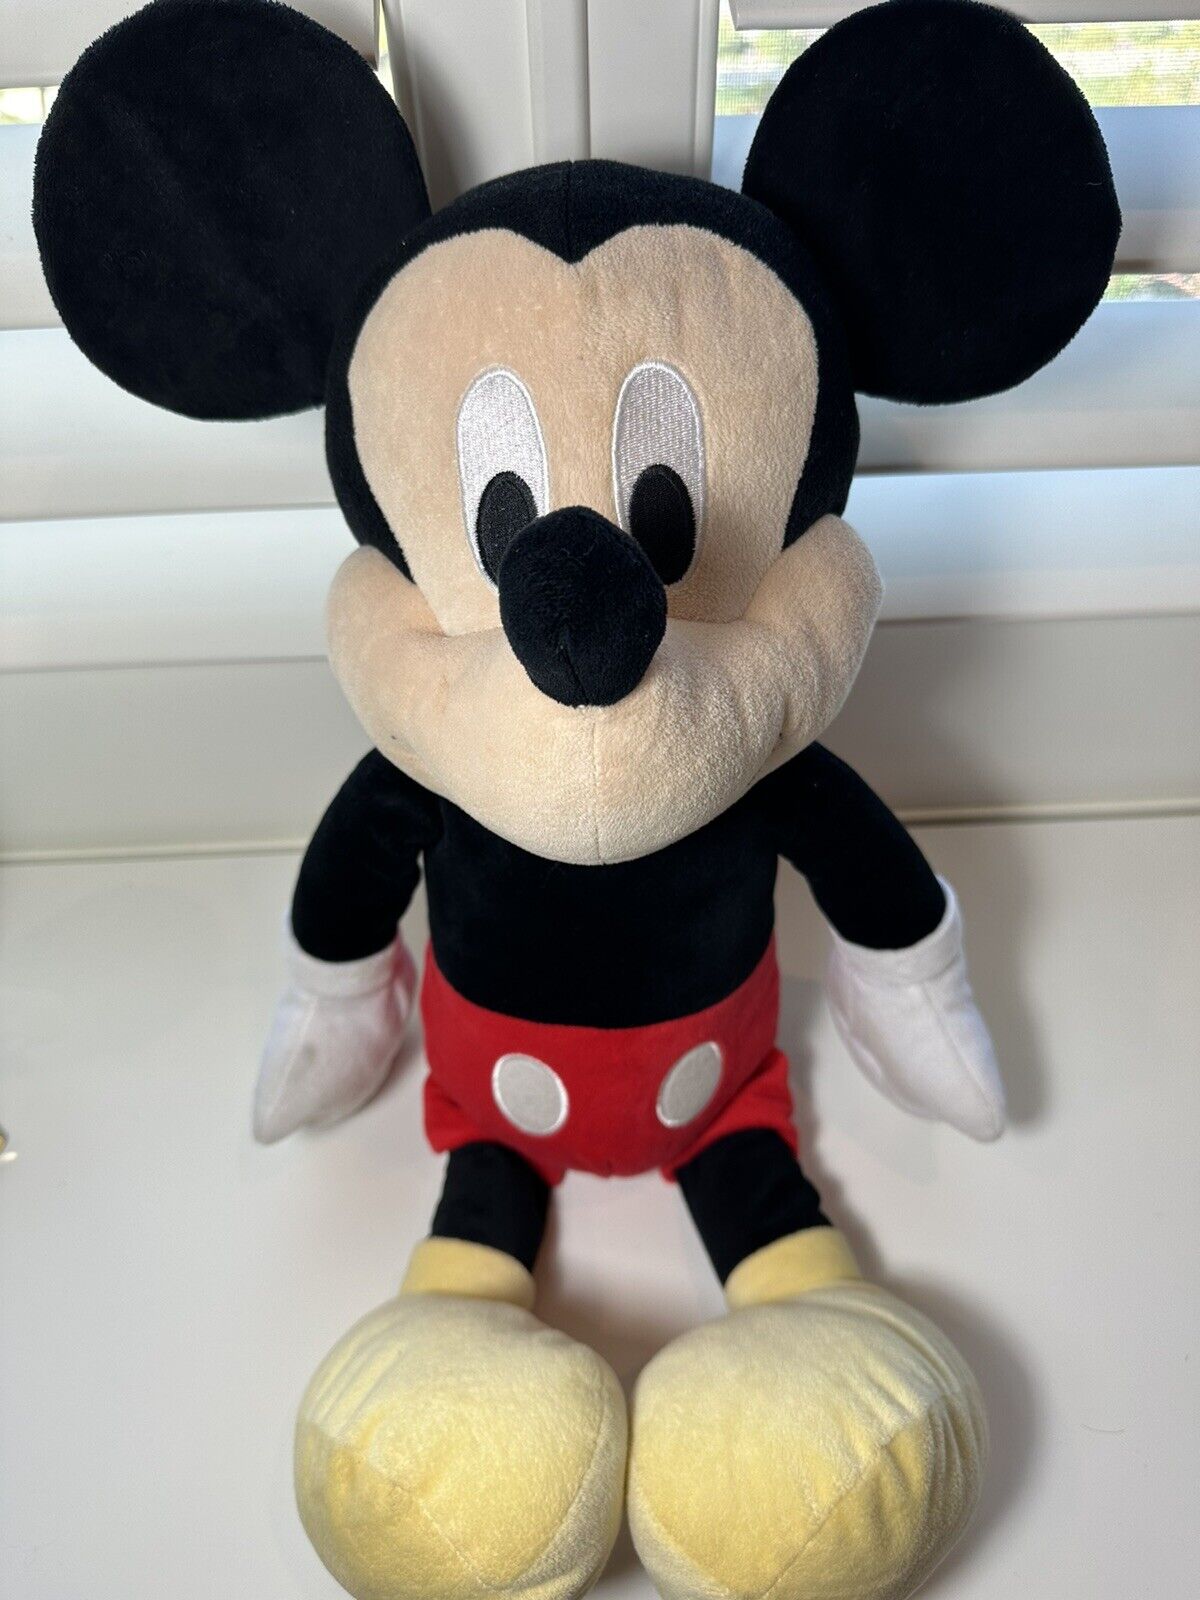 New Authentic Disney Mickey Mouse Jumbo Plush 32 inches: Model 20234